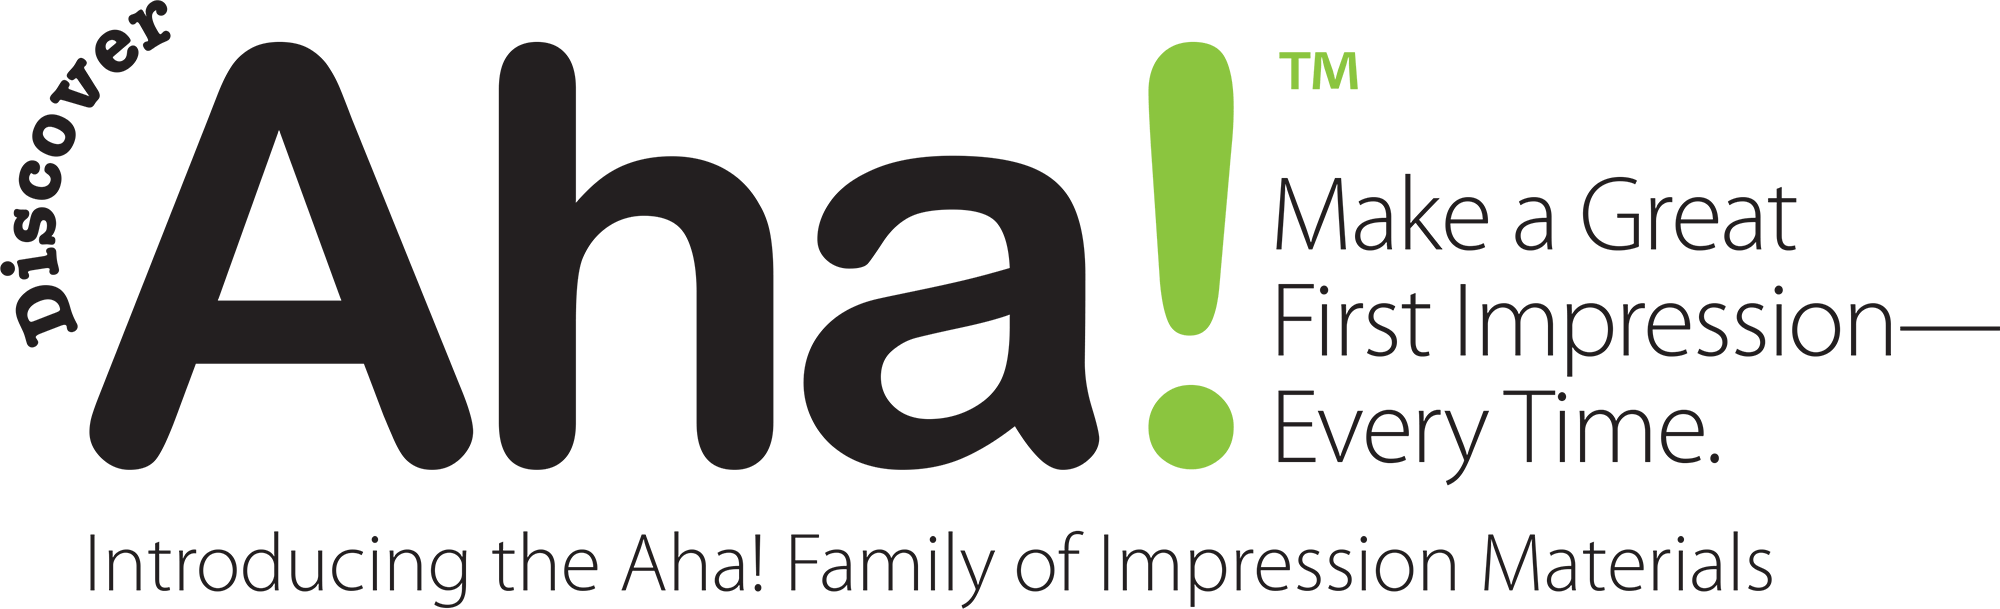 Introducing the Aha! Family of Impression Materials